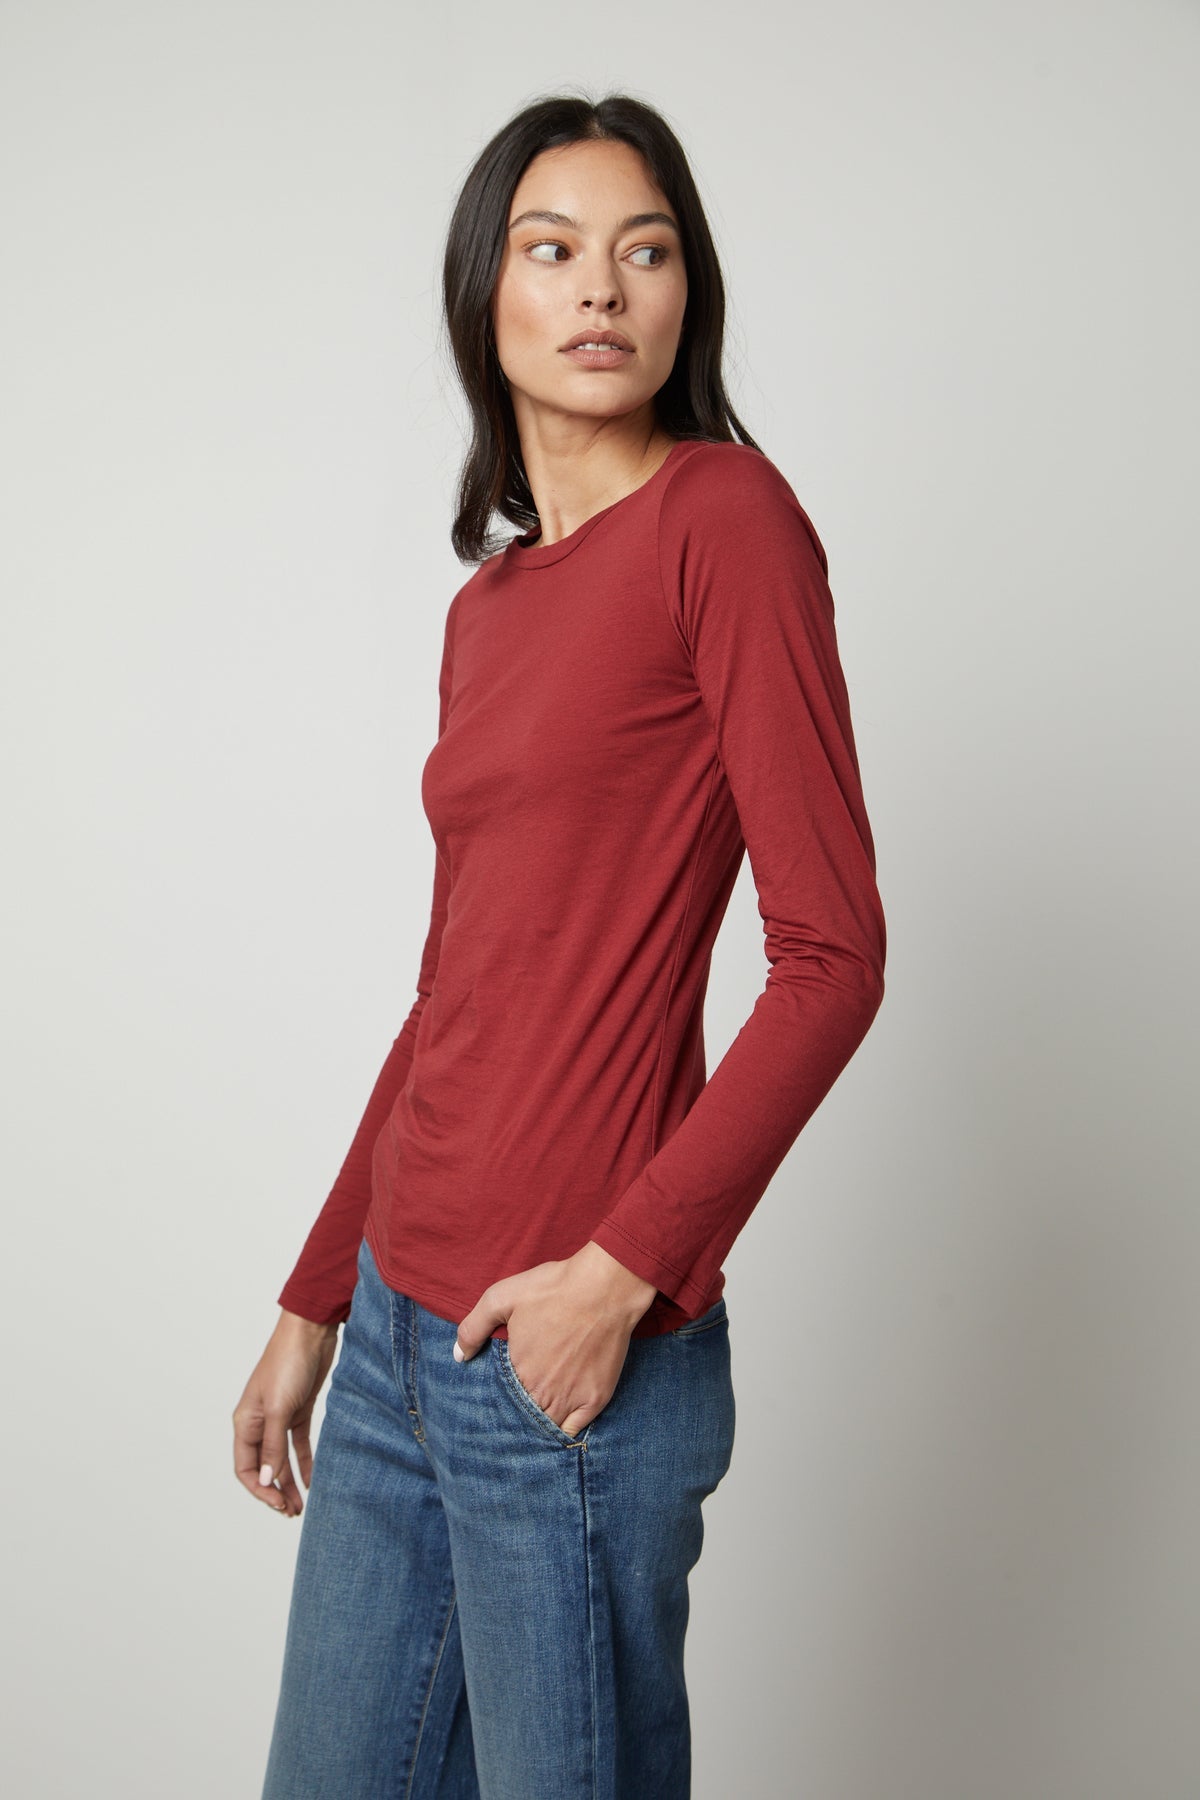   The model is wearing a red long-sleeved ZOFINA GAUZY WHISPER FITTED CREW NECK TEE by Velvet by Graham & Spencer. 